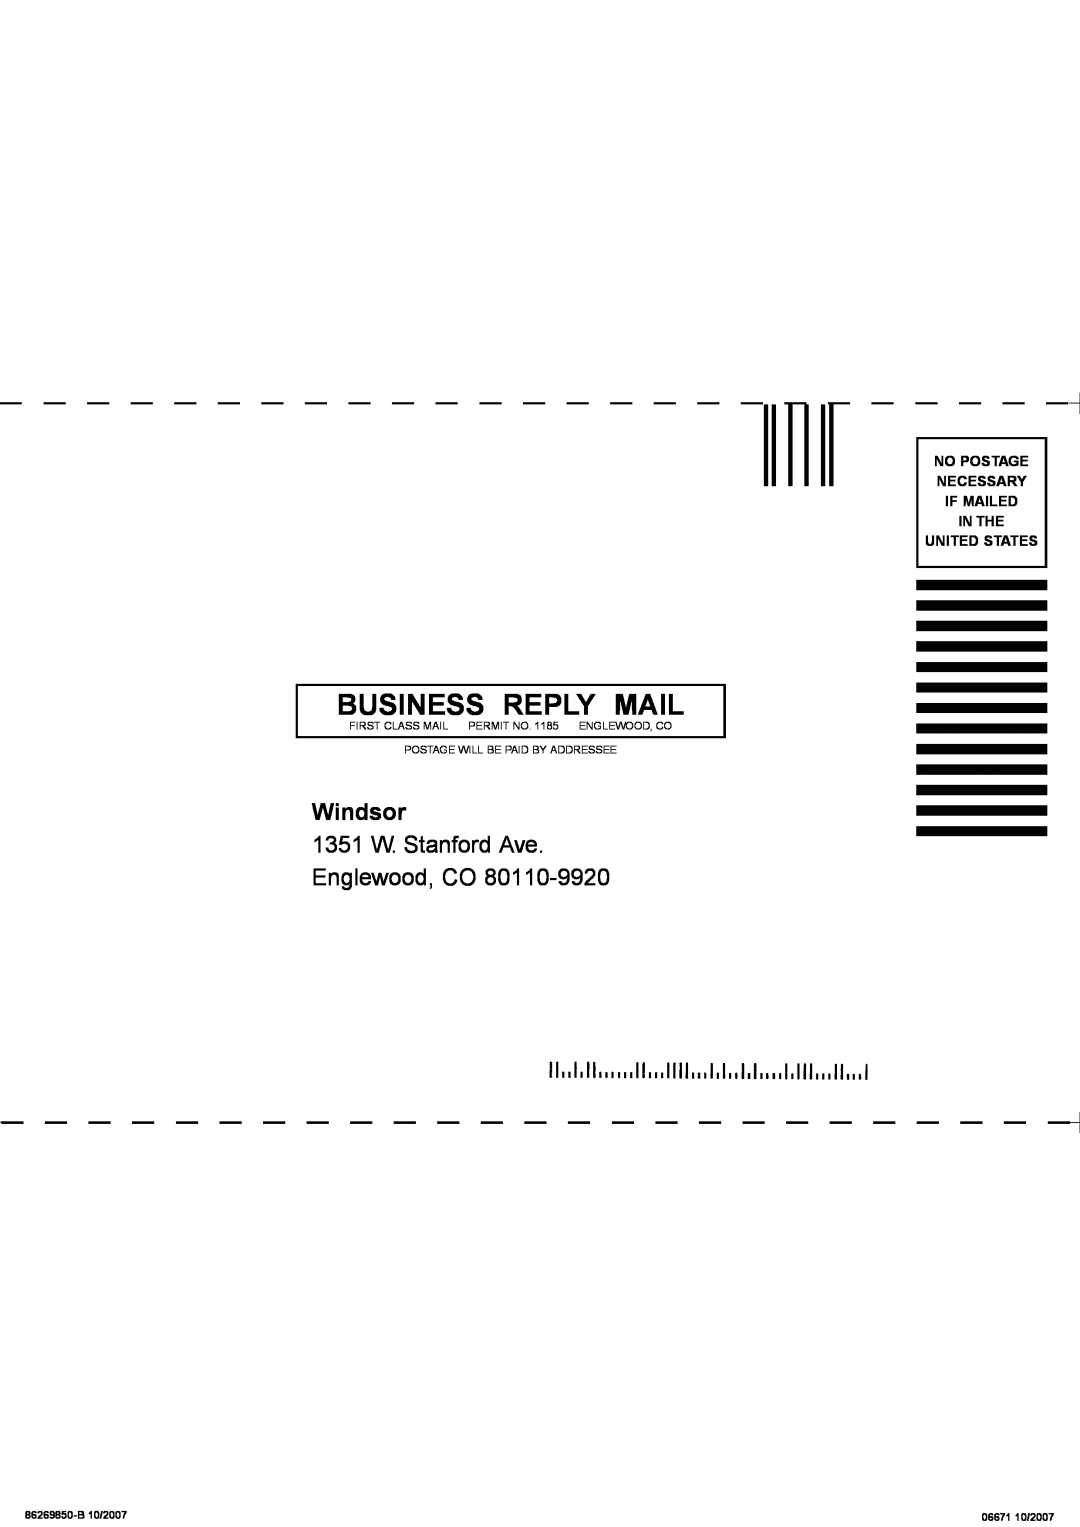 Windsor SRXP15IA Business Reply Mail, Windsor, 1351 W. Stanford Ave Englewood, CO, No Postage Necessary If Mailed In The 